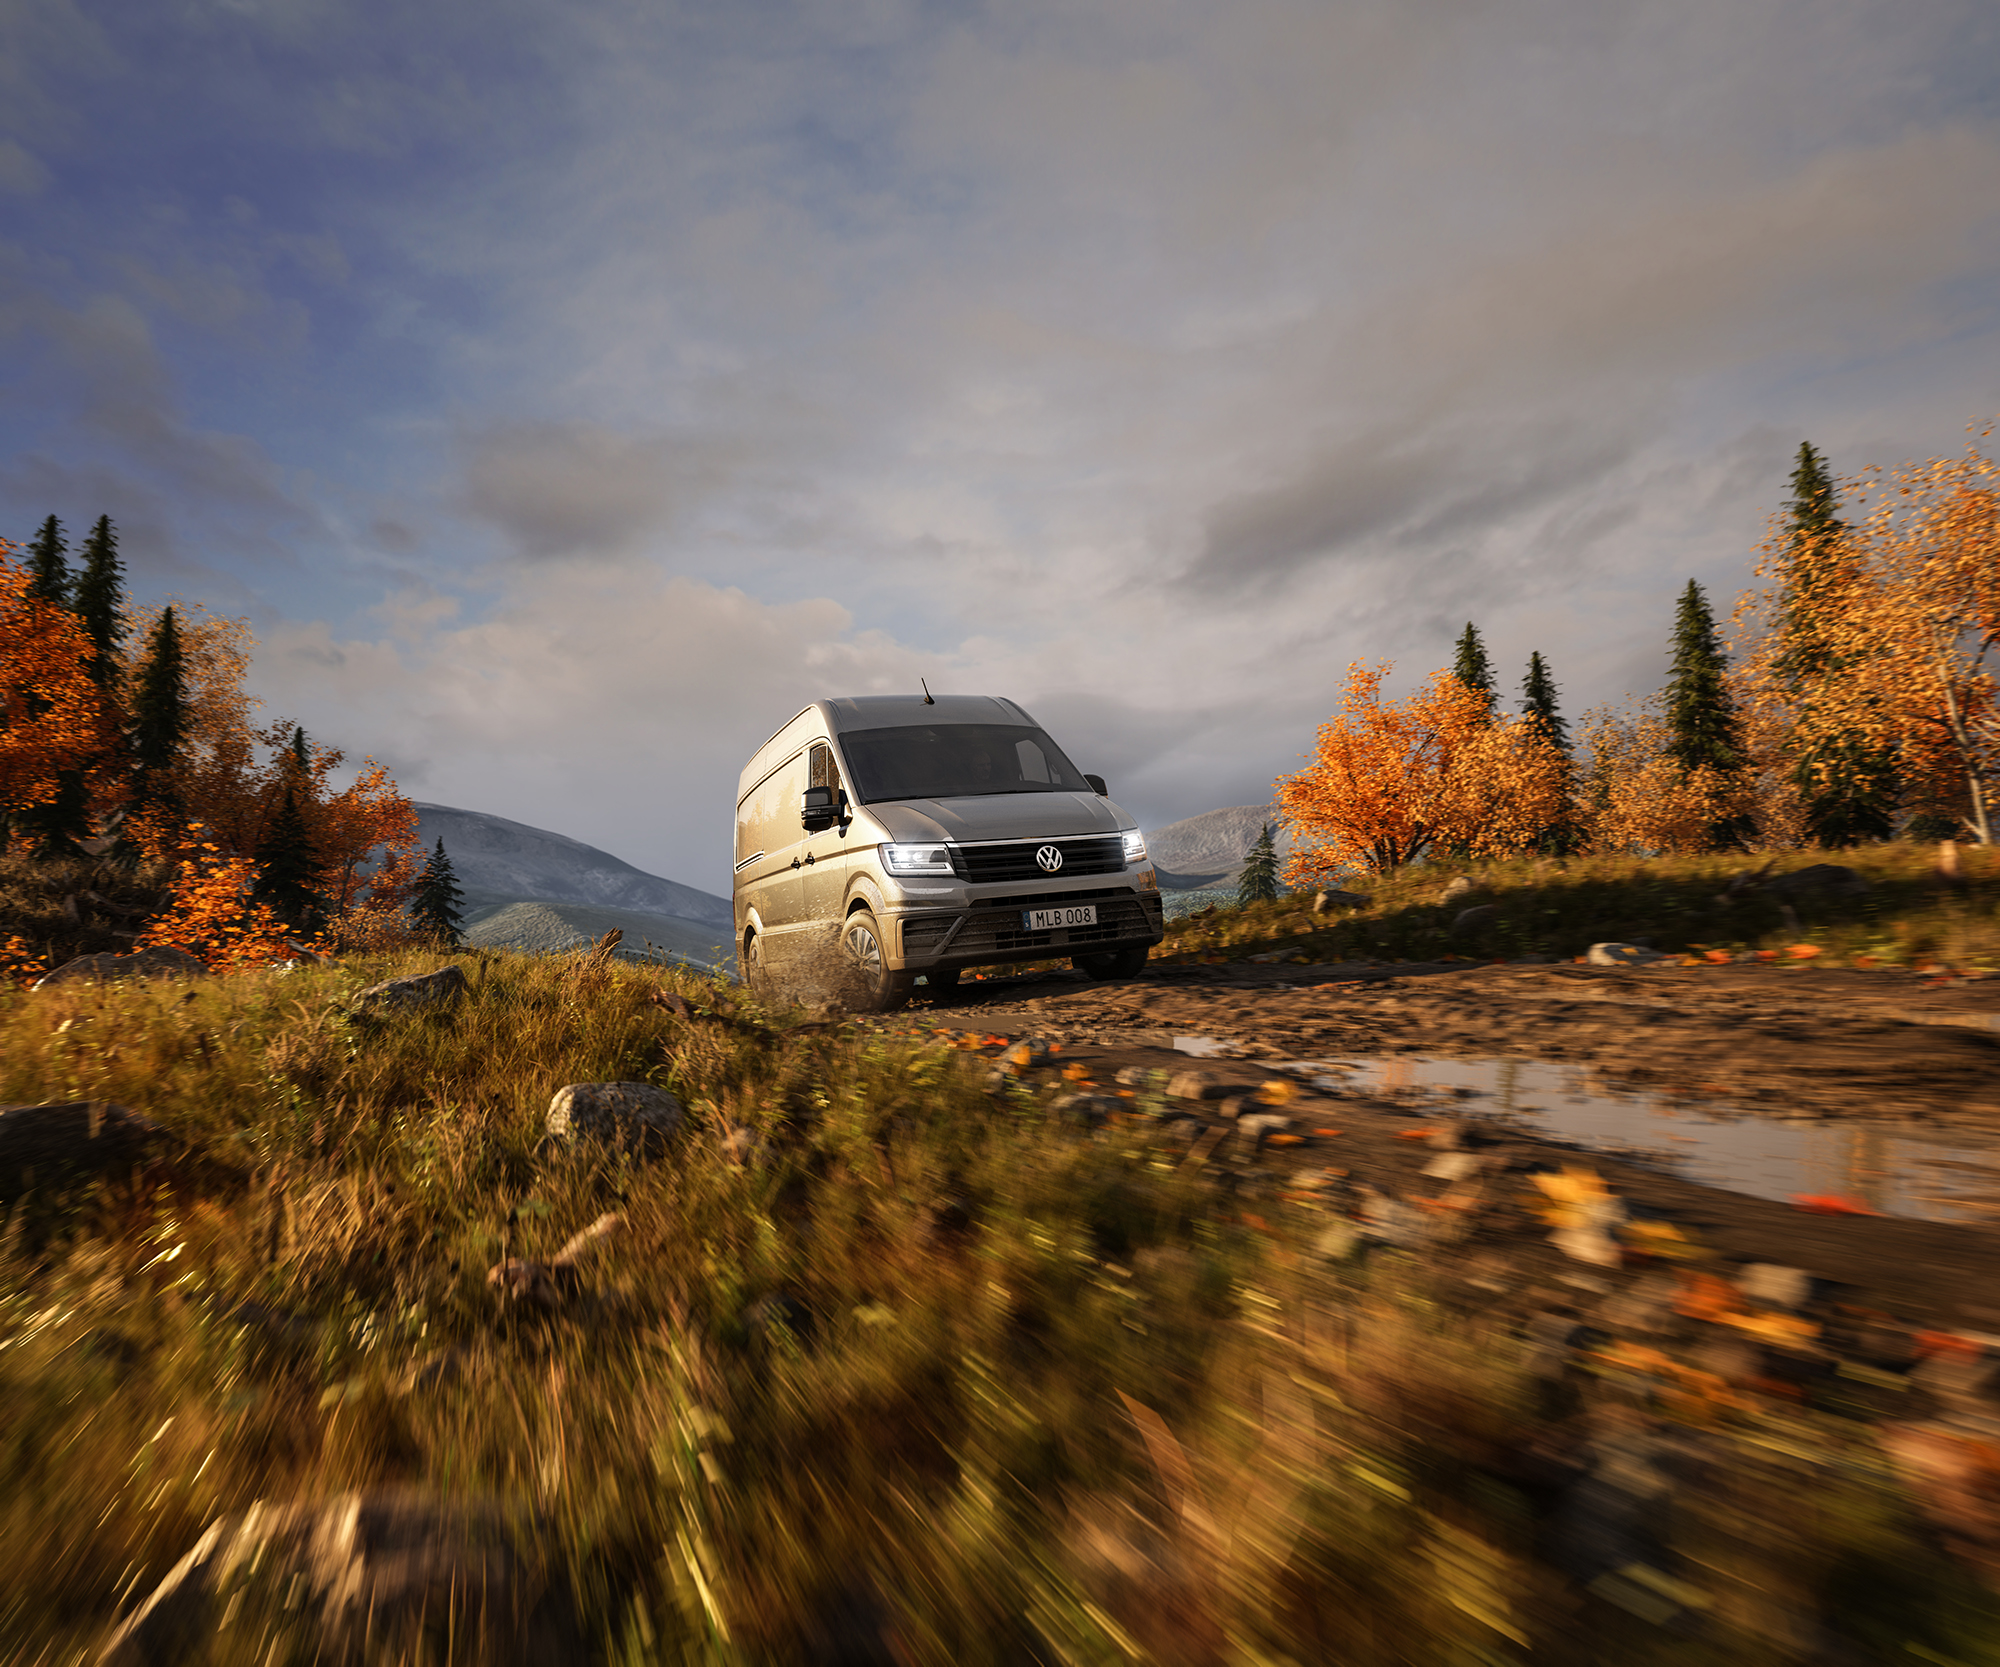 Volkswagen Crafter in the mountains on a backyard in autumn, muddy road Volymax cabinet and pickup Skåp lastbil 